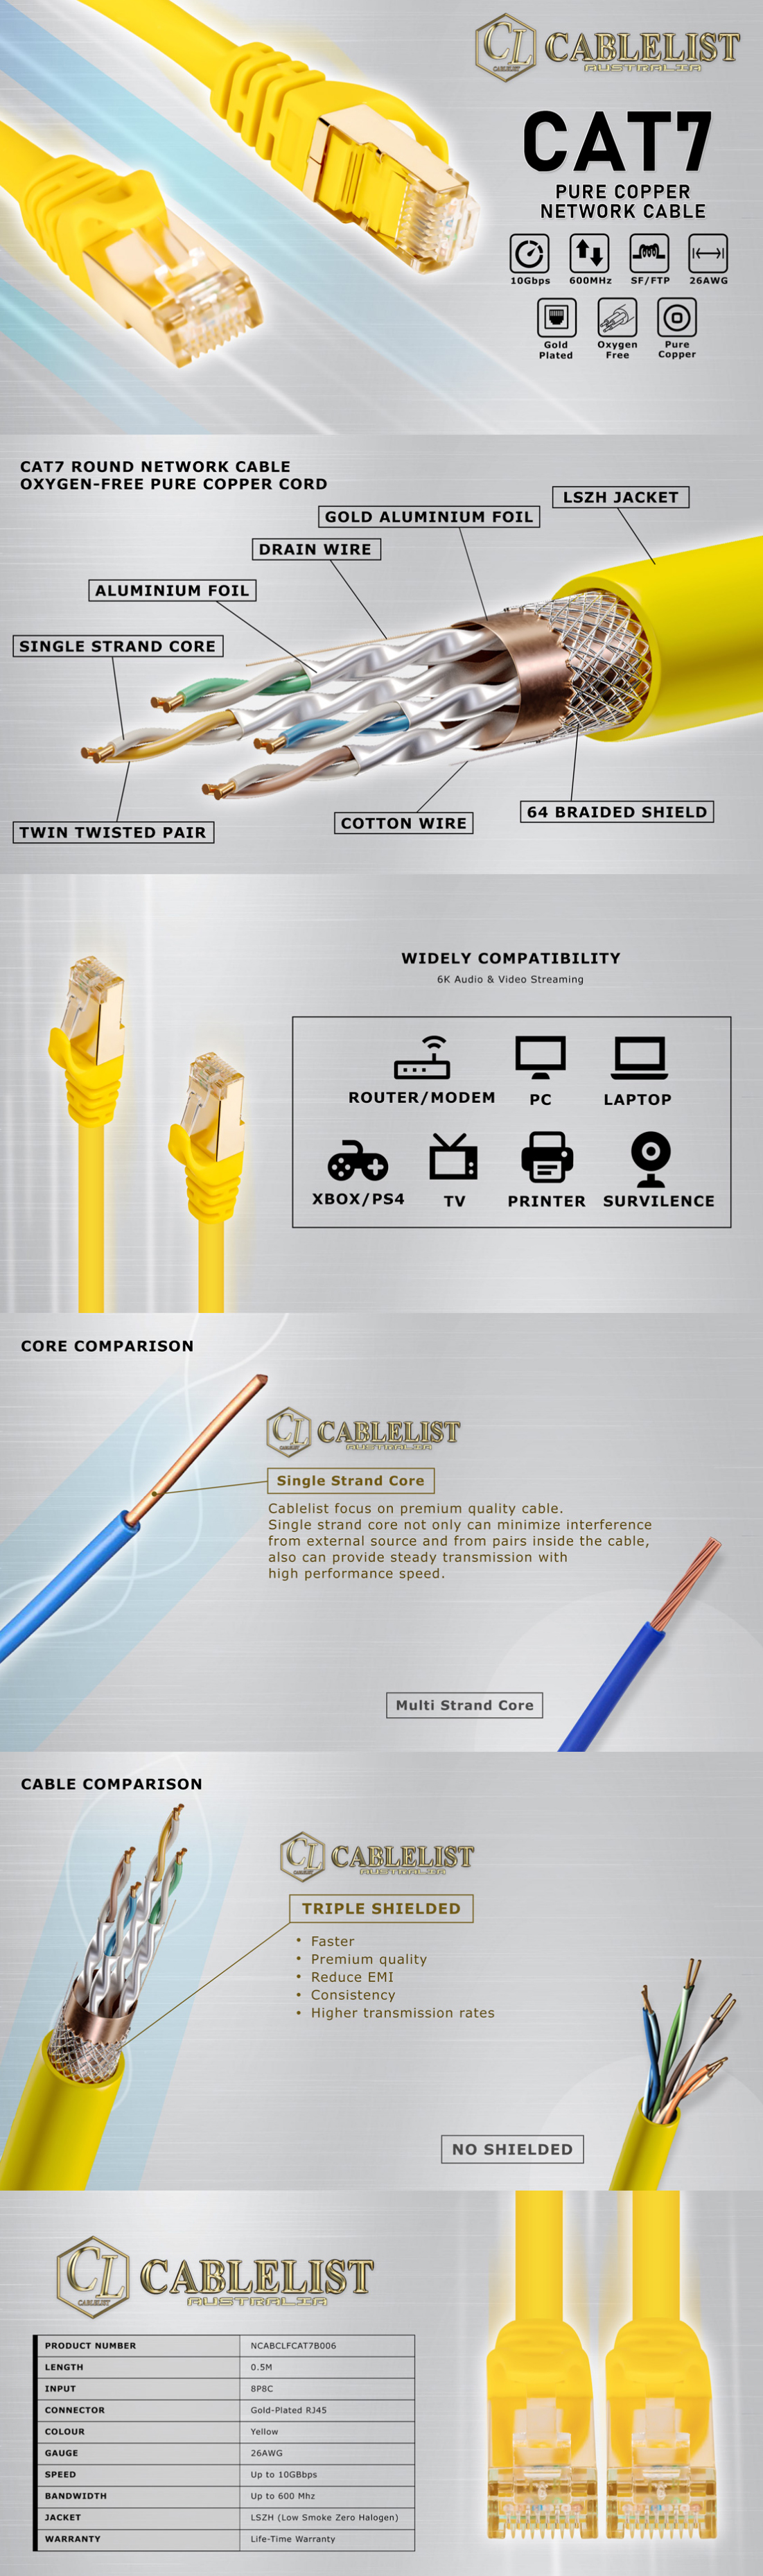 Network-Cables-Cablelist-Cat7-SFTP-RJ45-Ethernet-Network-Cable-50cm-Yellow-2